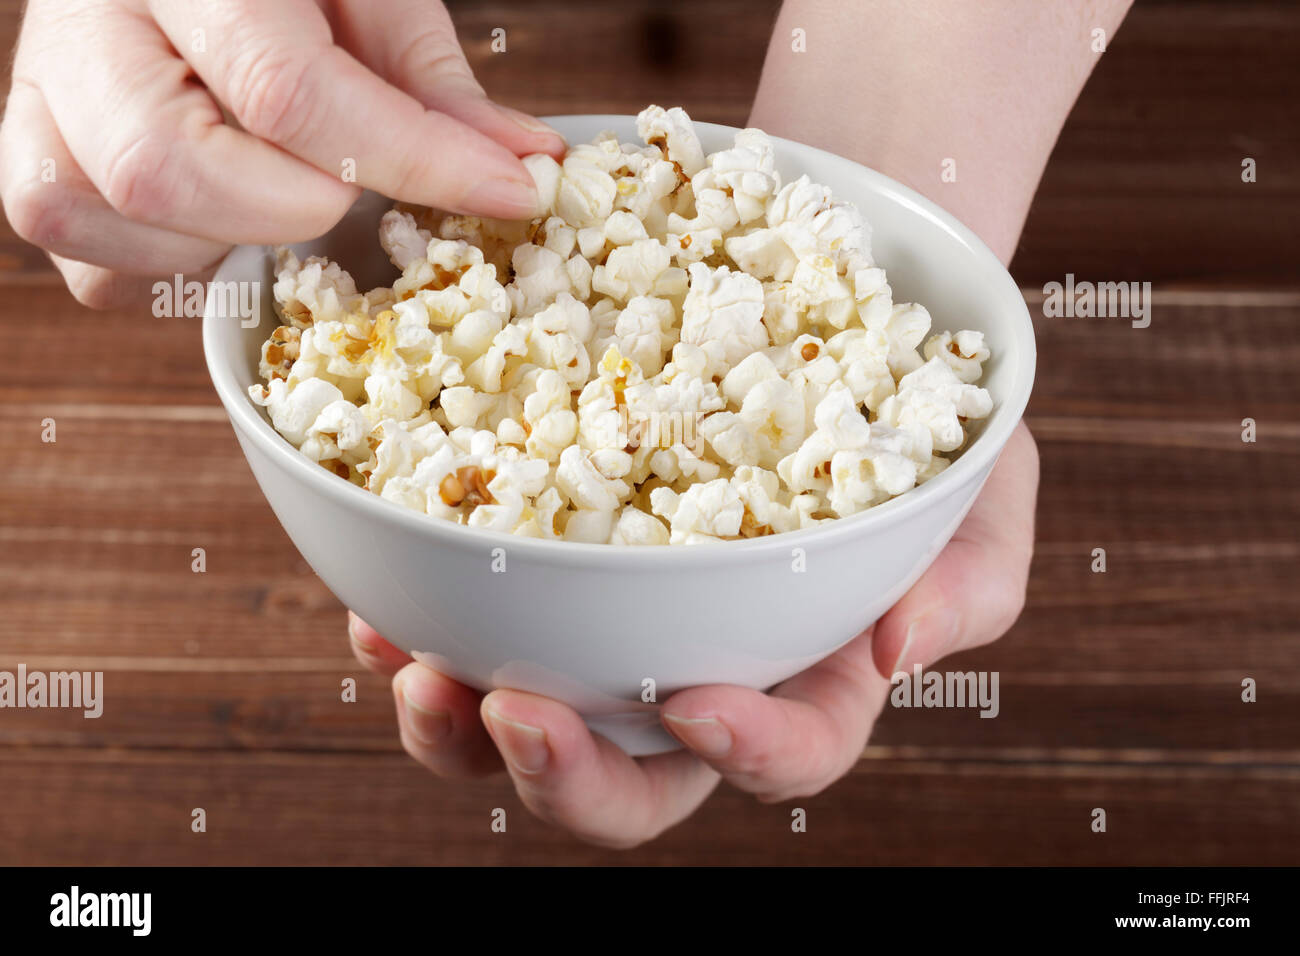 Hands holding bowl of popcorn Stock Photo